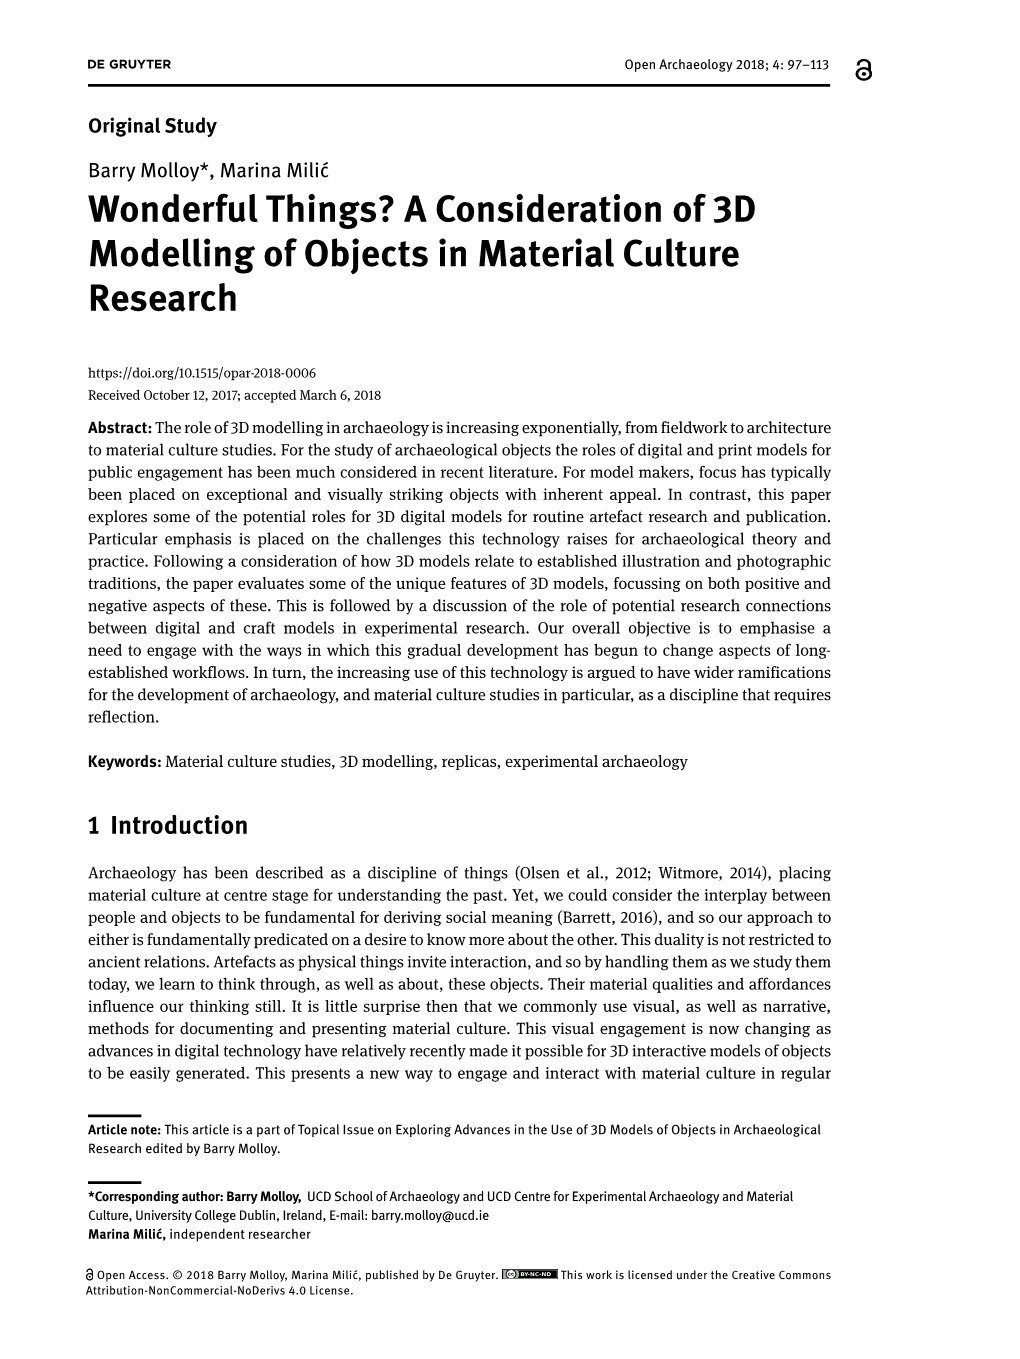 A Consideration of 3D Modelling of Objects in Material Culture Research